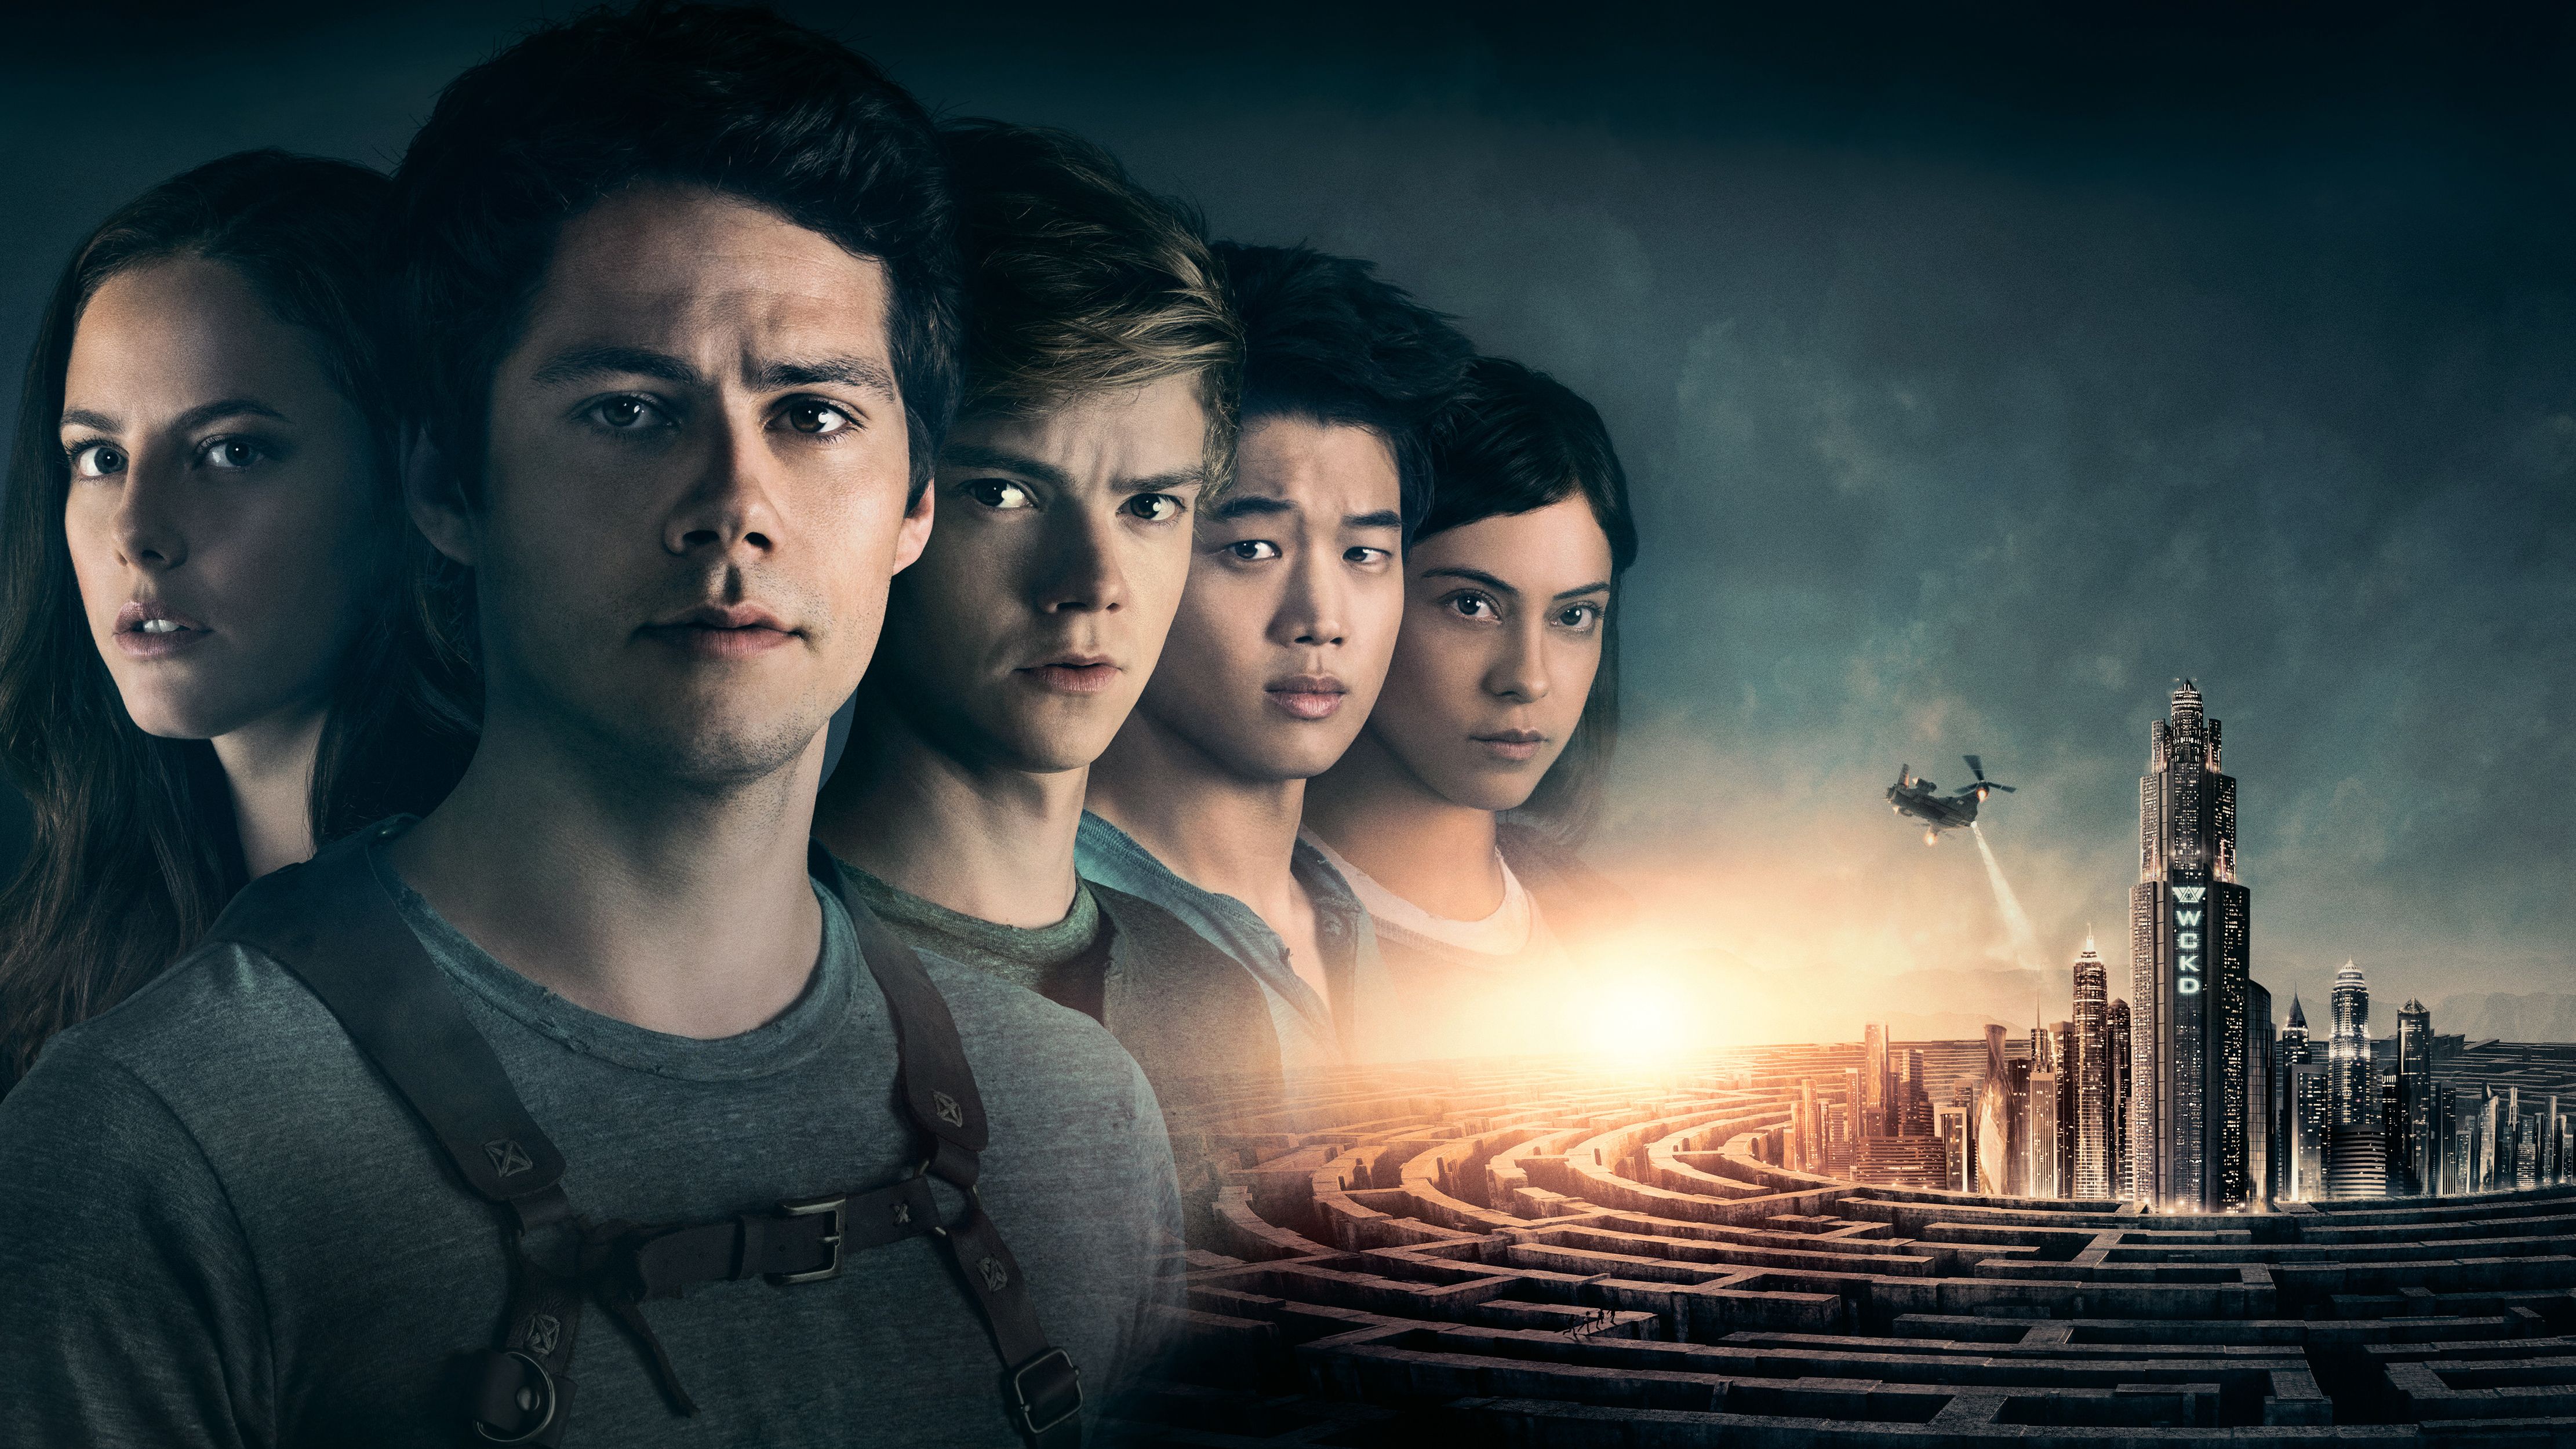 Maze Runner The Death Cure Movie Poster 2018 Wallpapers